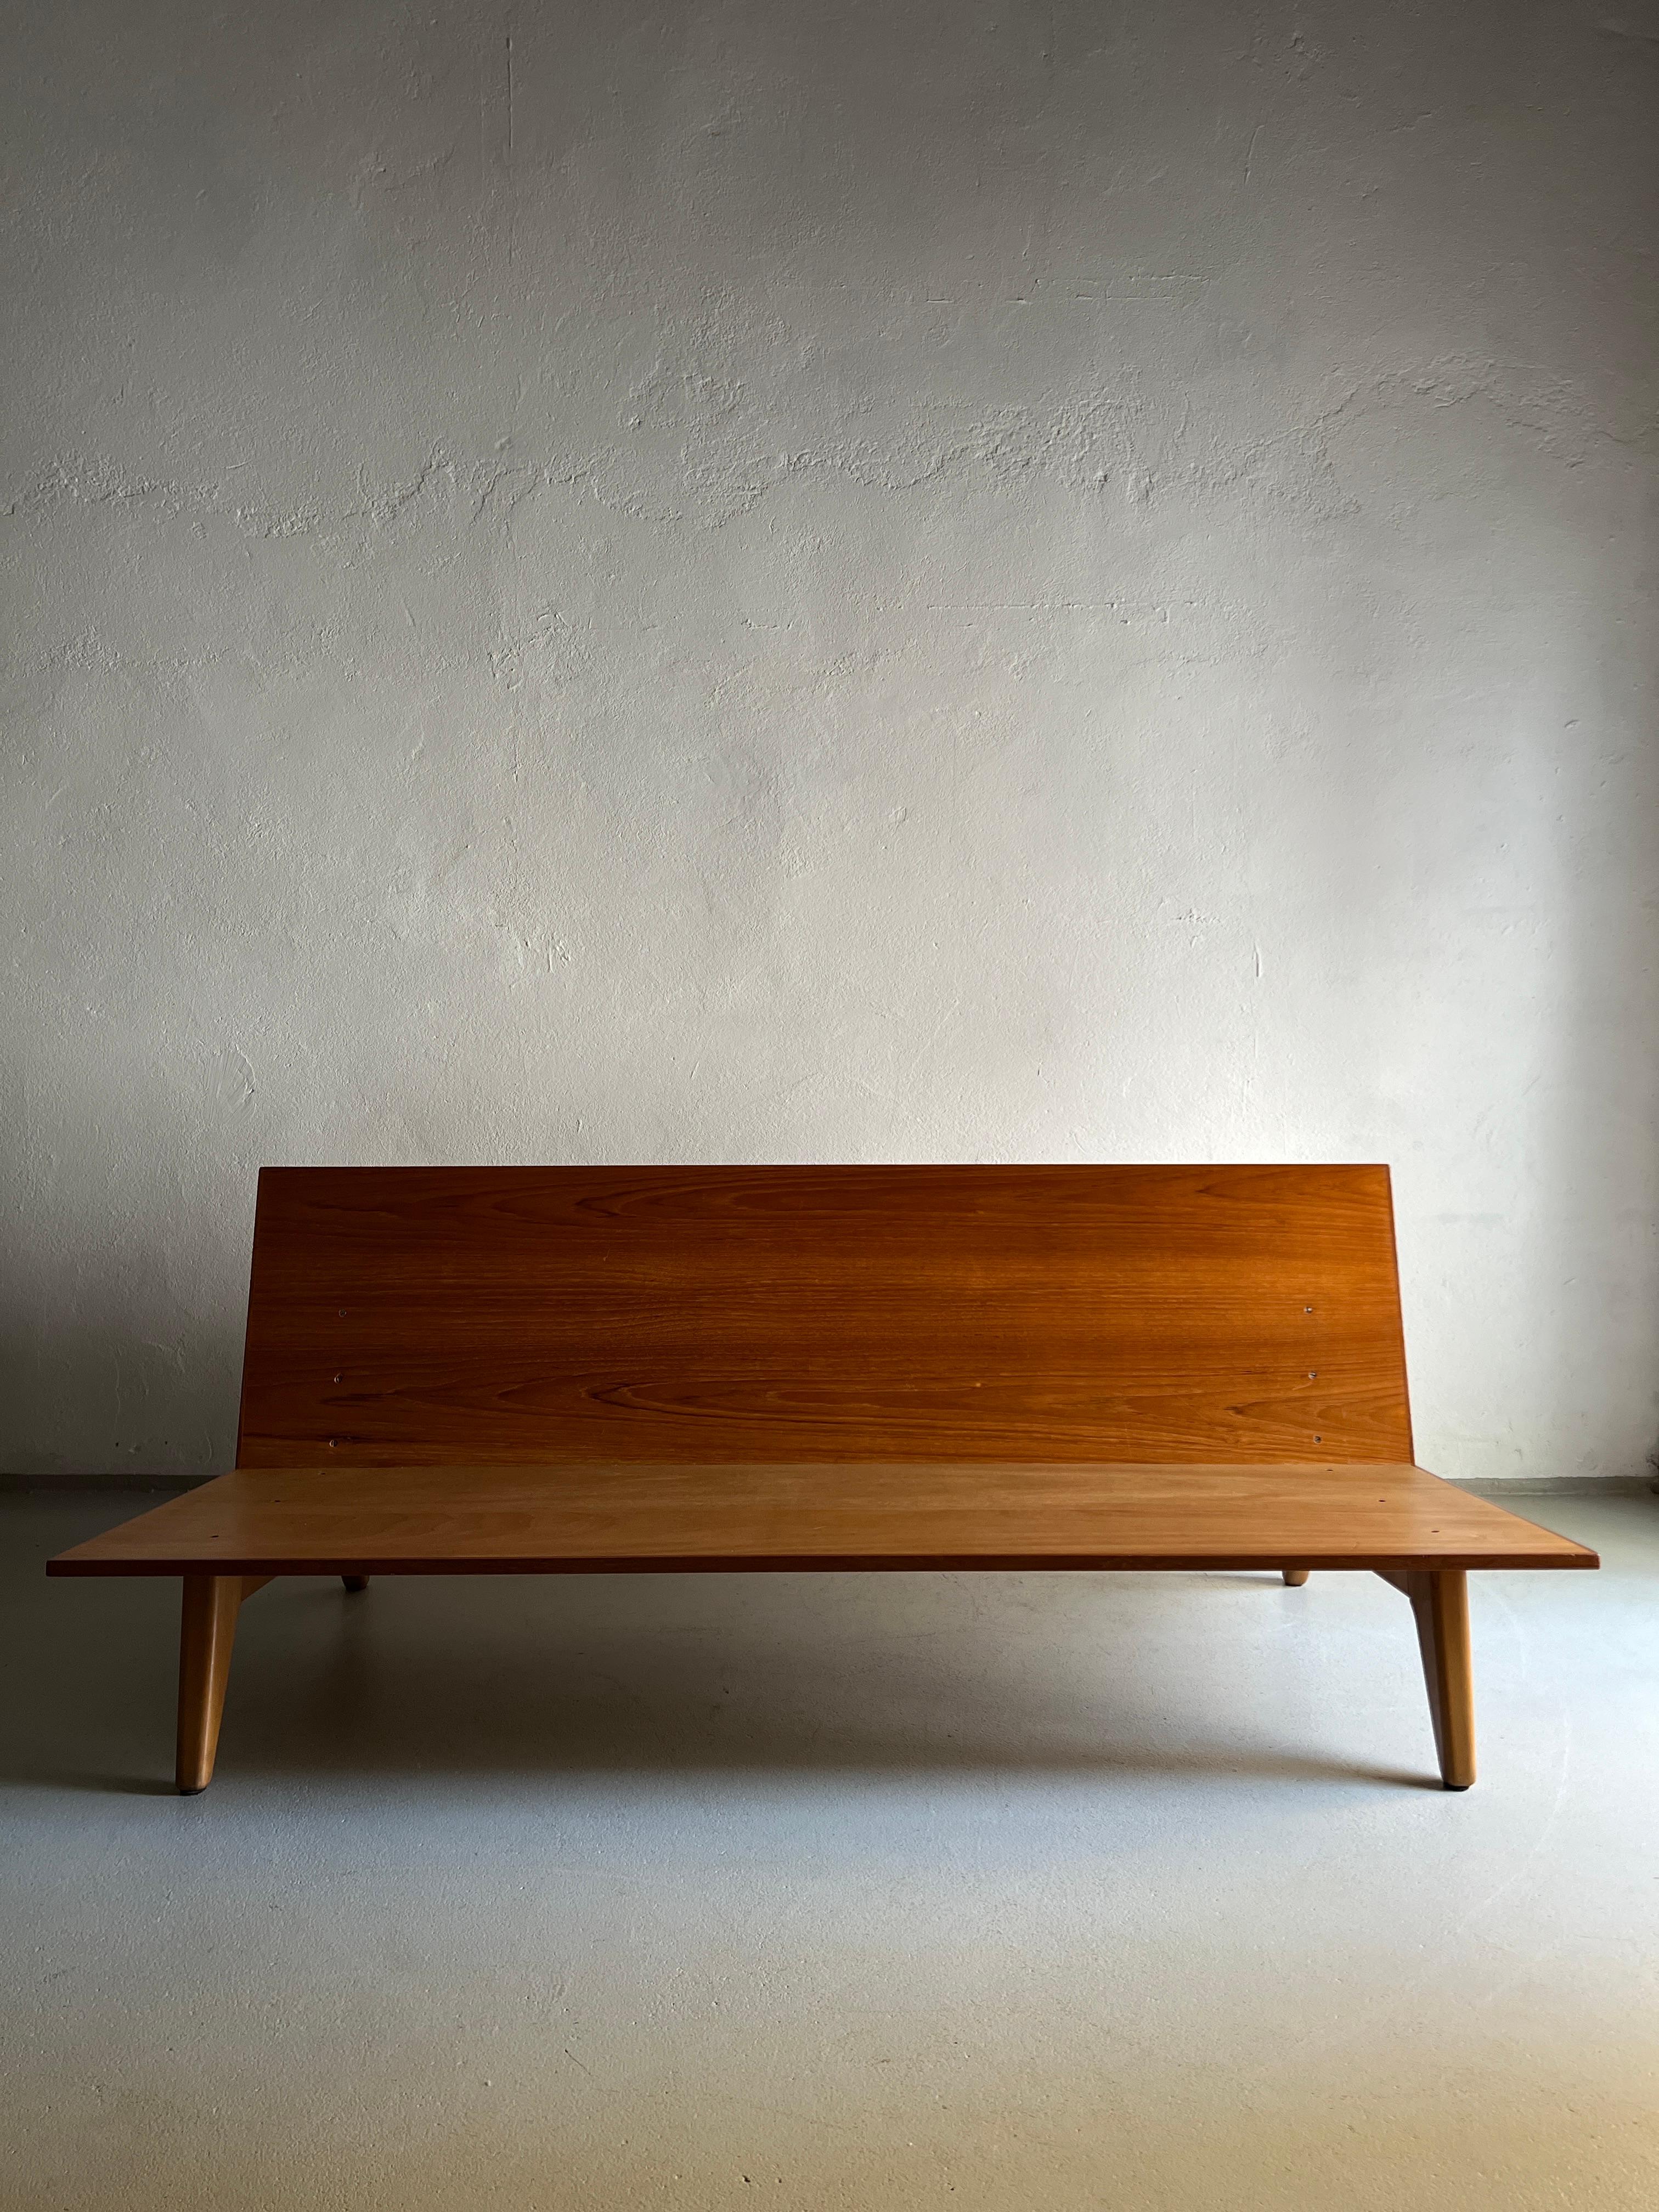 20th Century Teak Daybed Sofa by Gustaf Hiort Af Ornäs, Finland 1950s For Sale